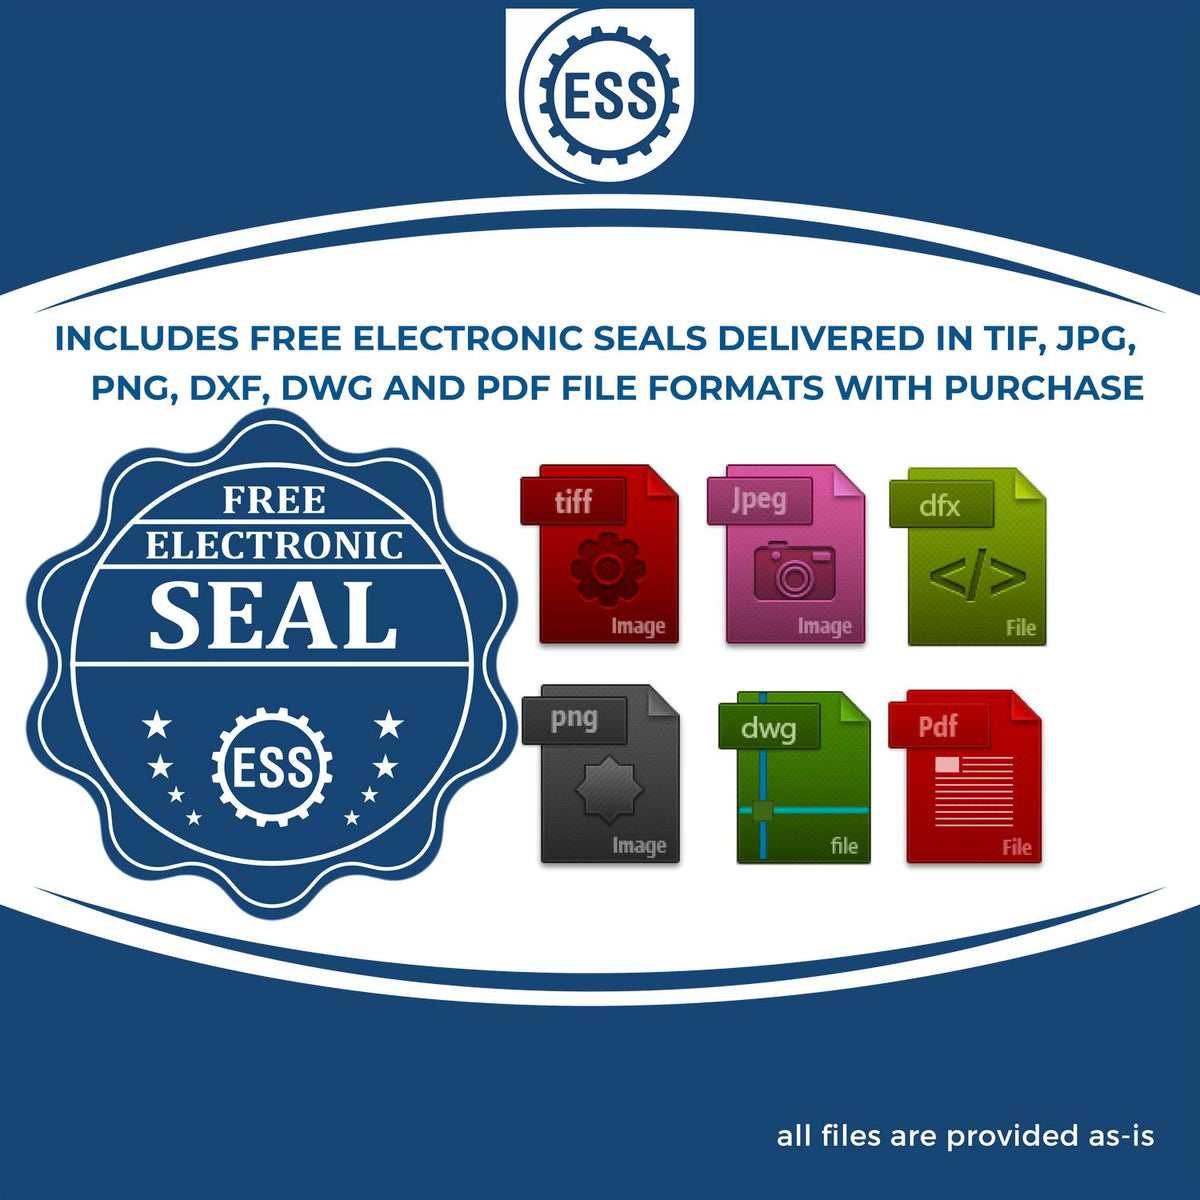 An infographic for the free electronic seal for the Hybrid District of Columbia Land Surveyor Seal illustrating the different file type icons such as DXF, DWG, TIF, JPG and PNG.